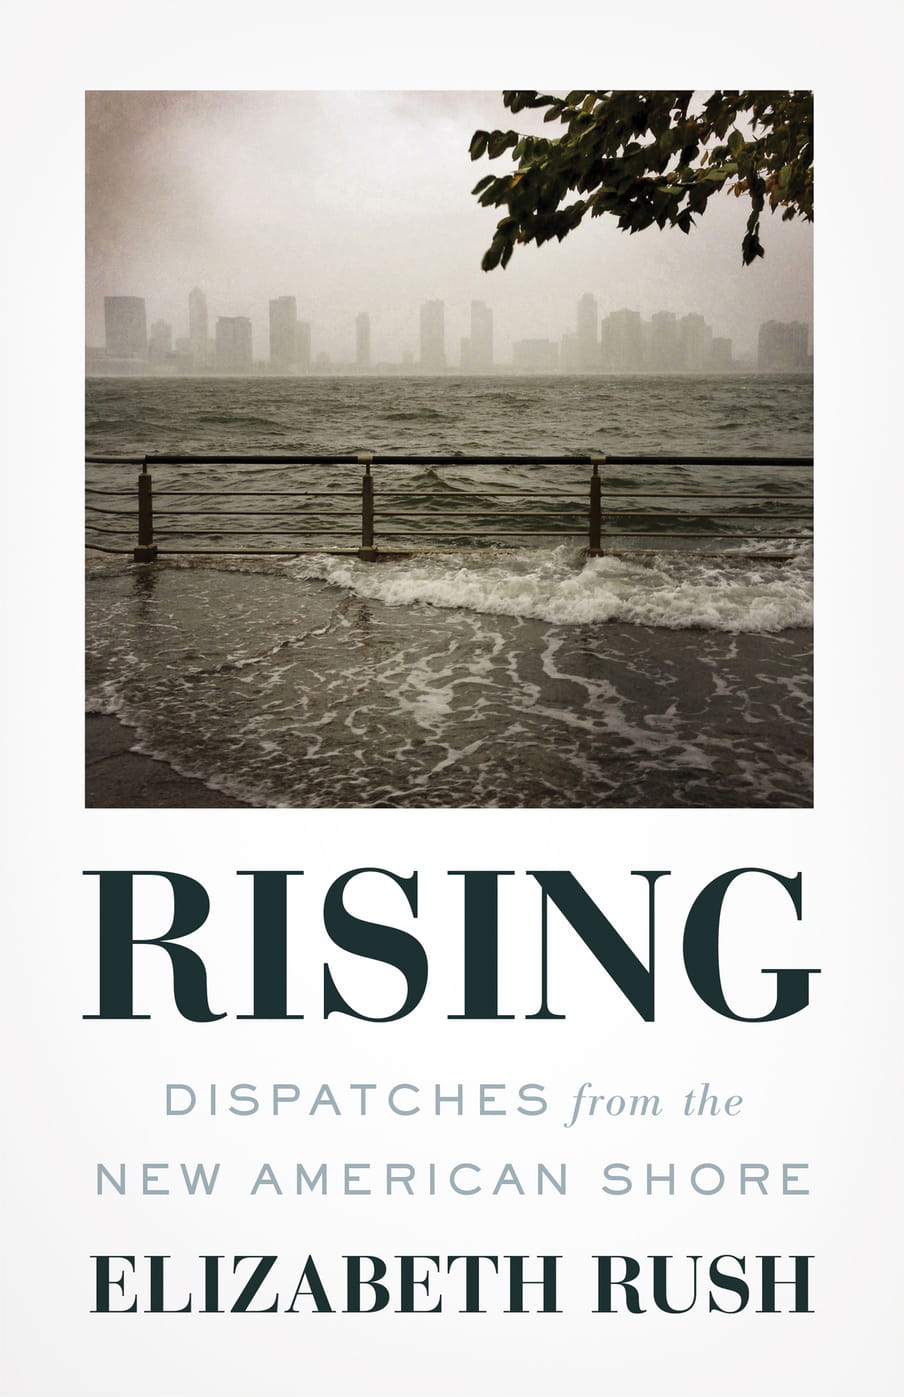 Book Cover of ‘Rising’ depicting water coming over the edge of a boulevard, with the new york city skyline on the background